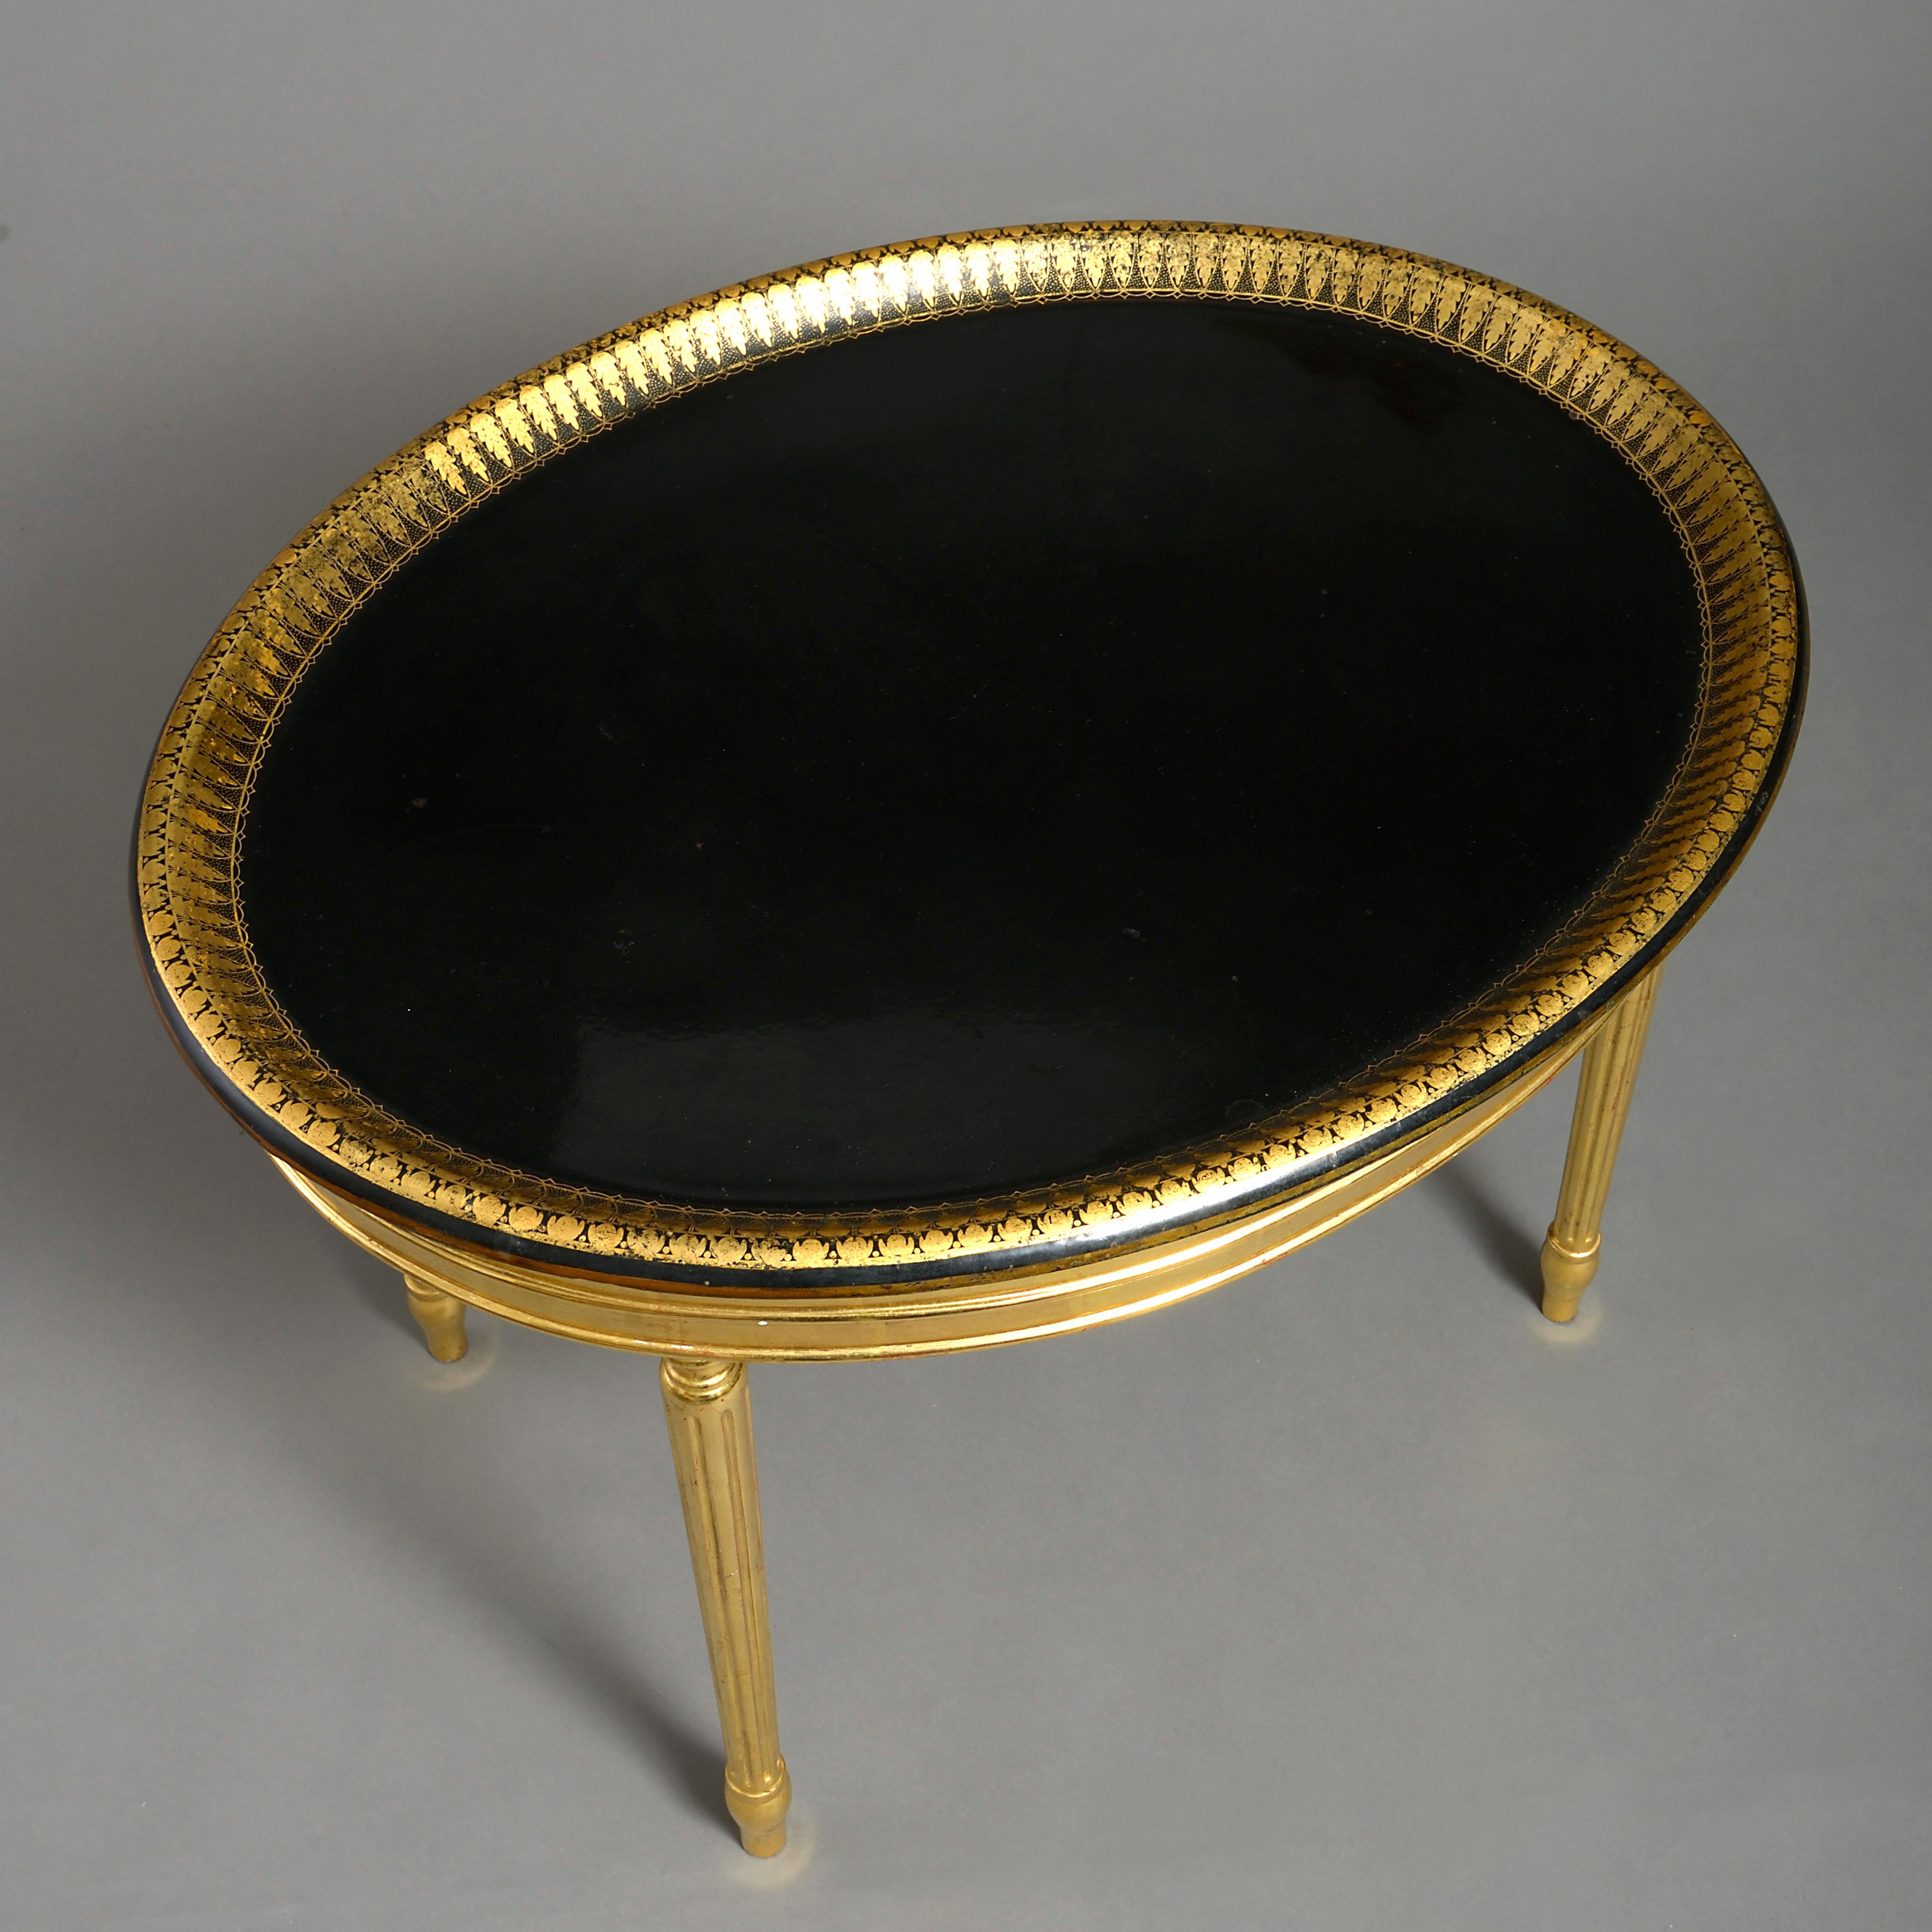 An early 19th century Regency period black and gilt decorated oval tray, set upon a later gilded base with fluted legs.